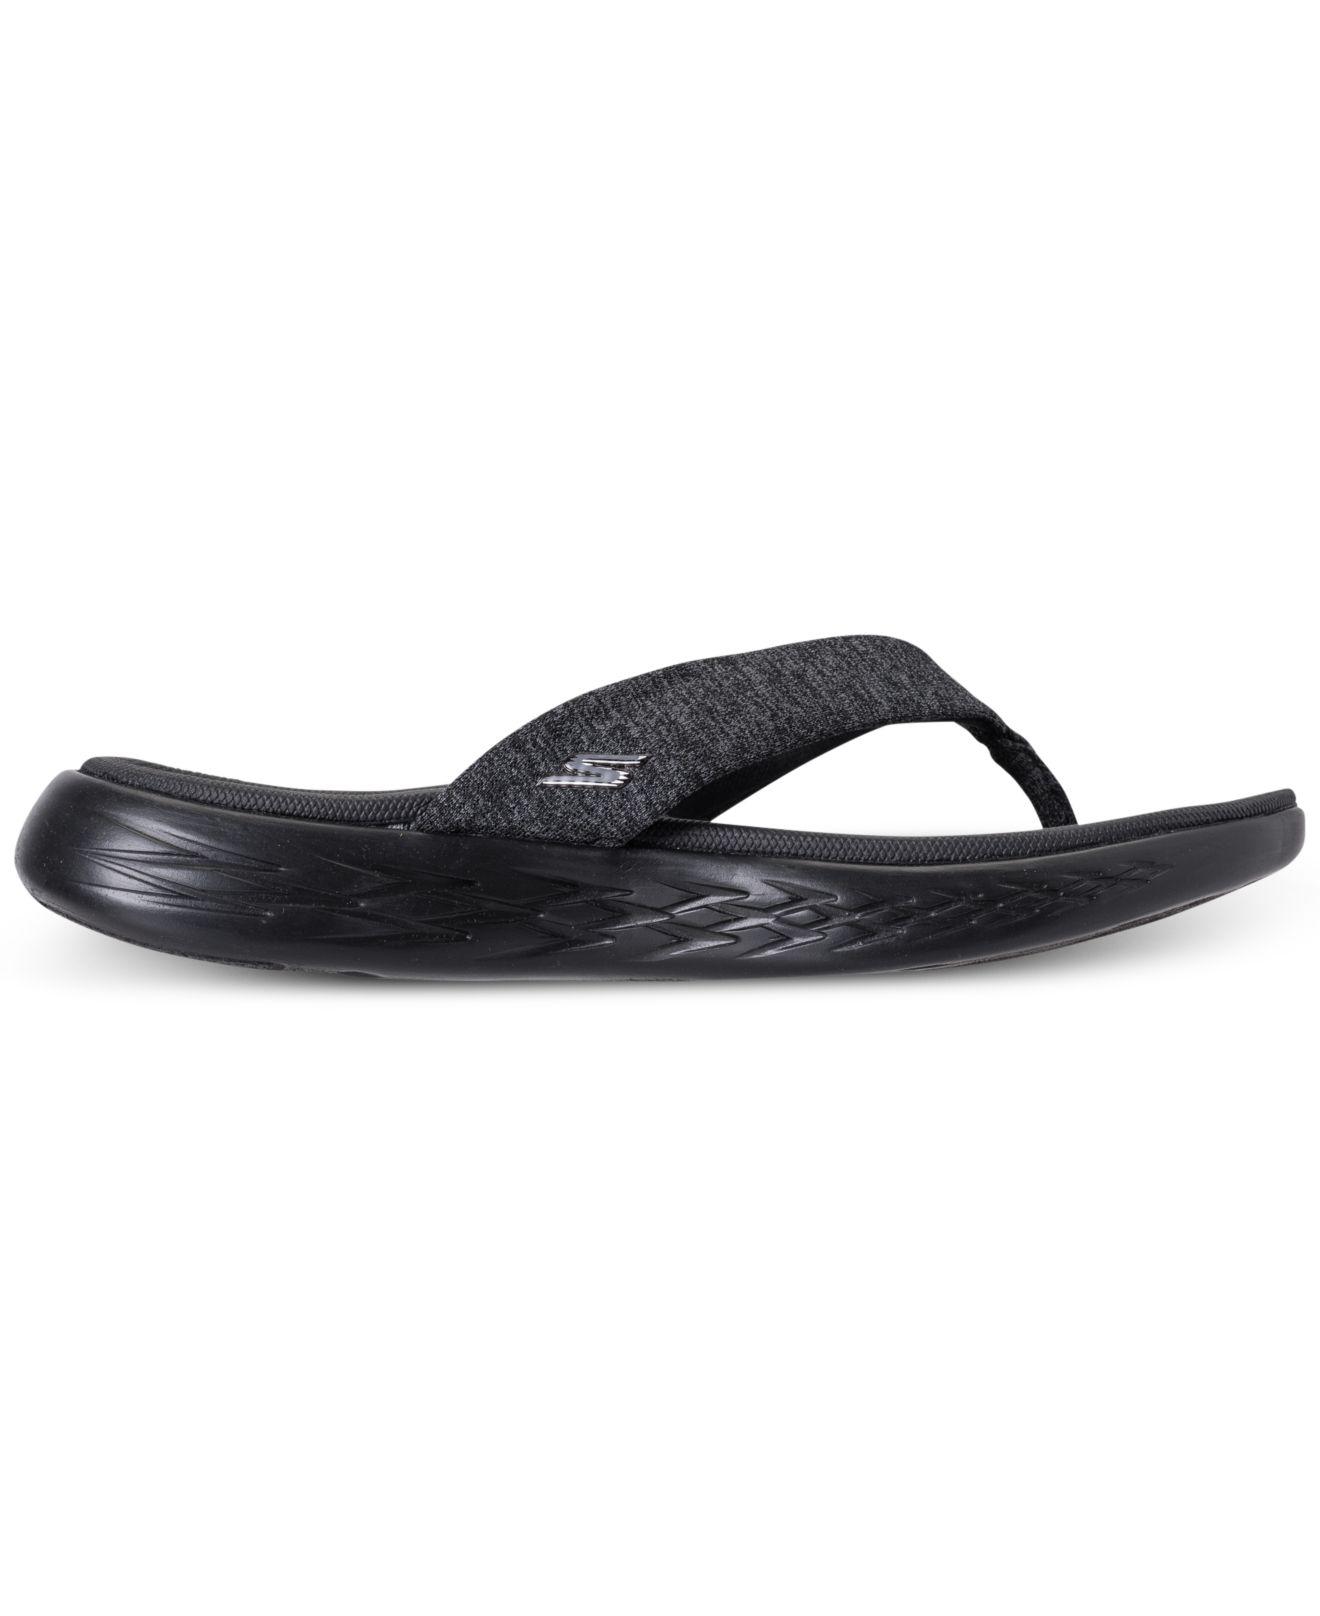 Skechers On The Go 600 - Preferred Athletic Thong Flip Flop Sandals From  Finish Line in Black - Save 26% | Lyst